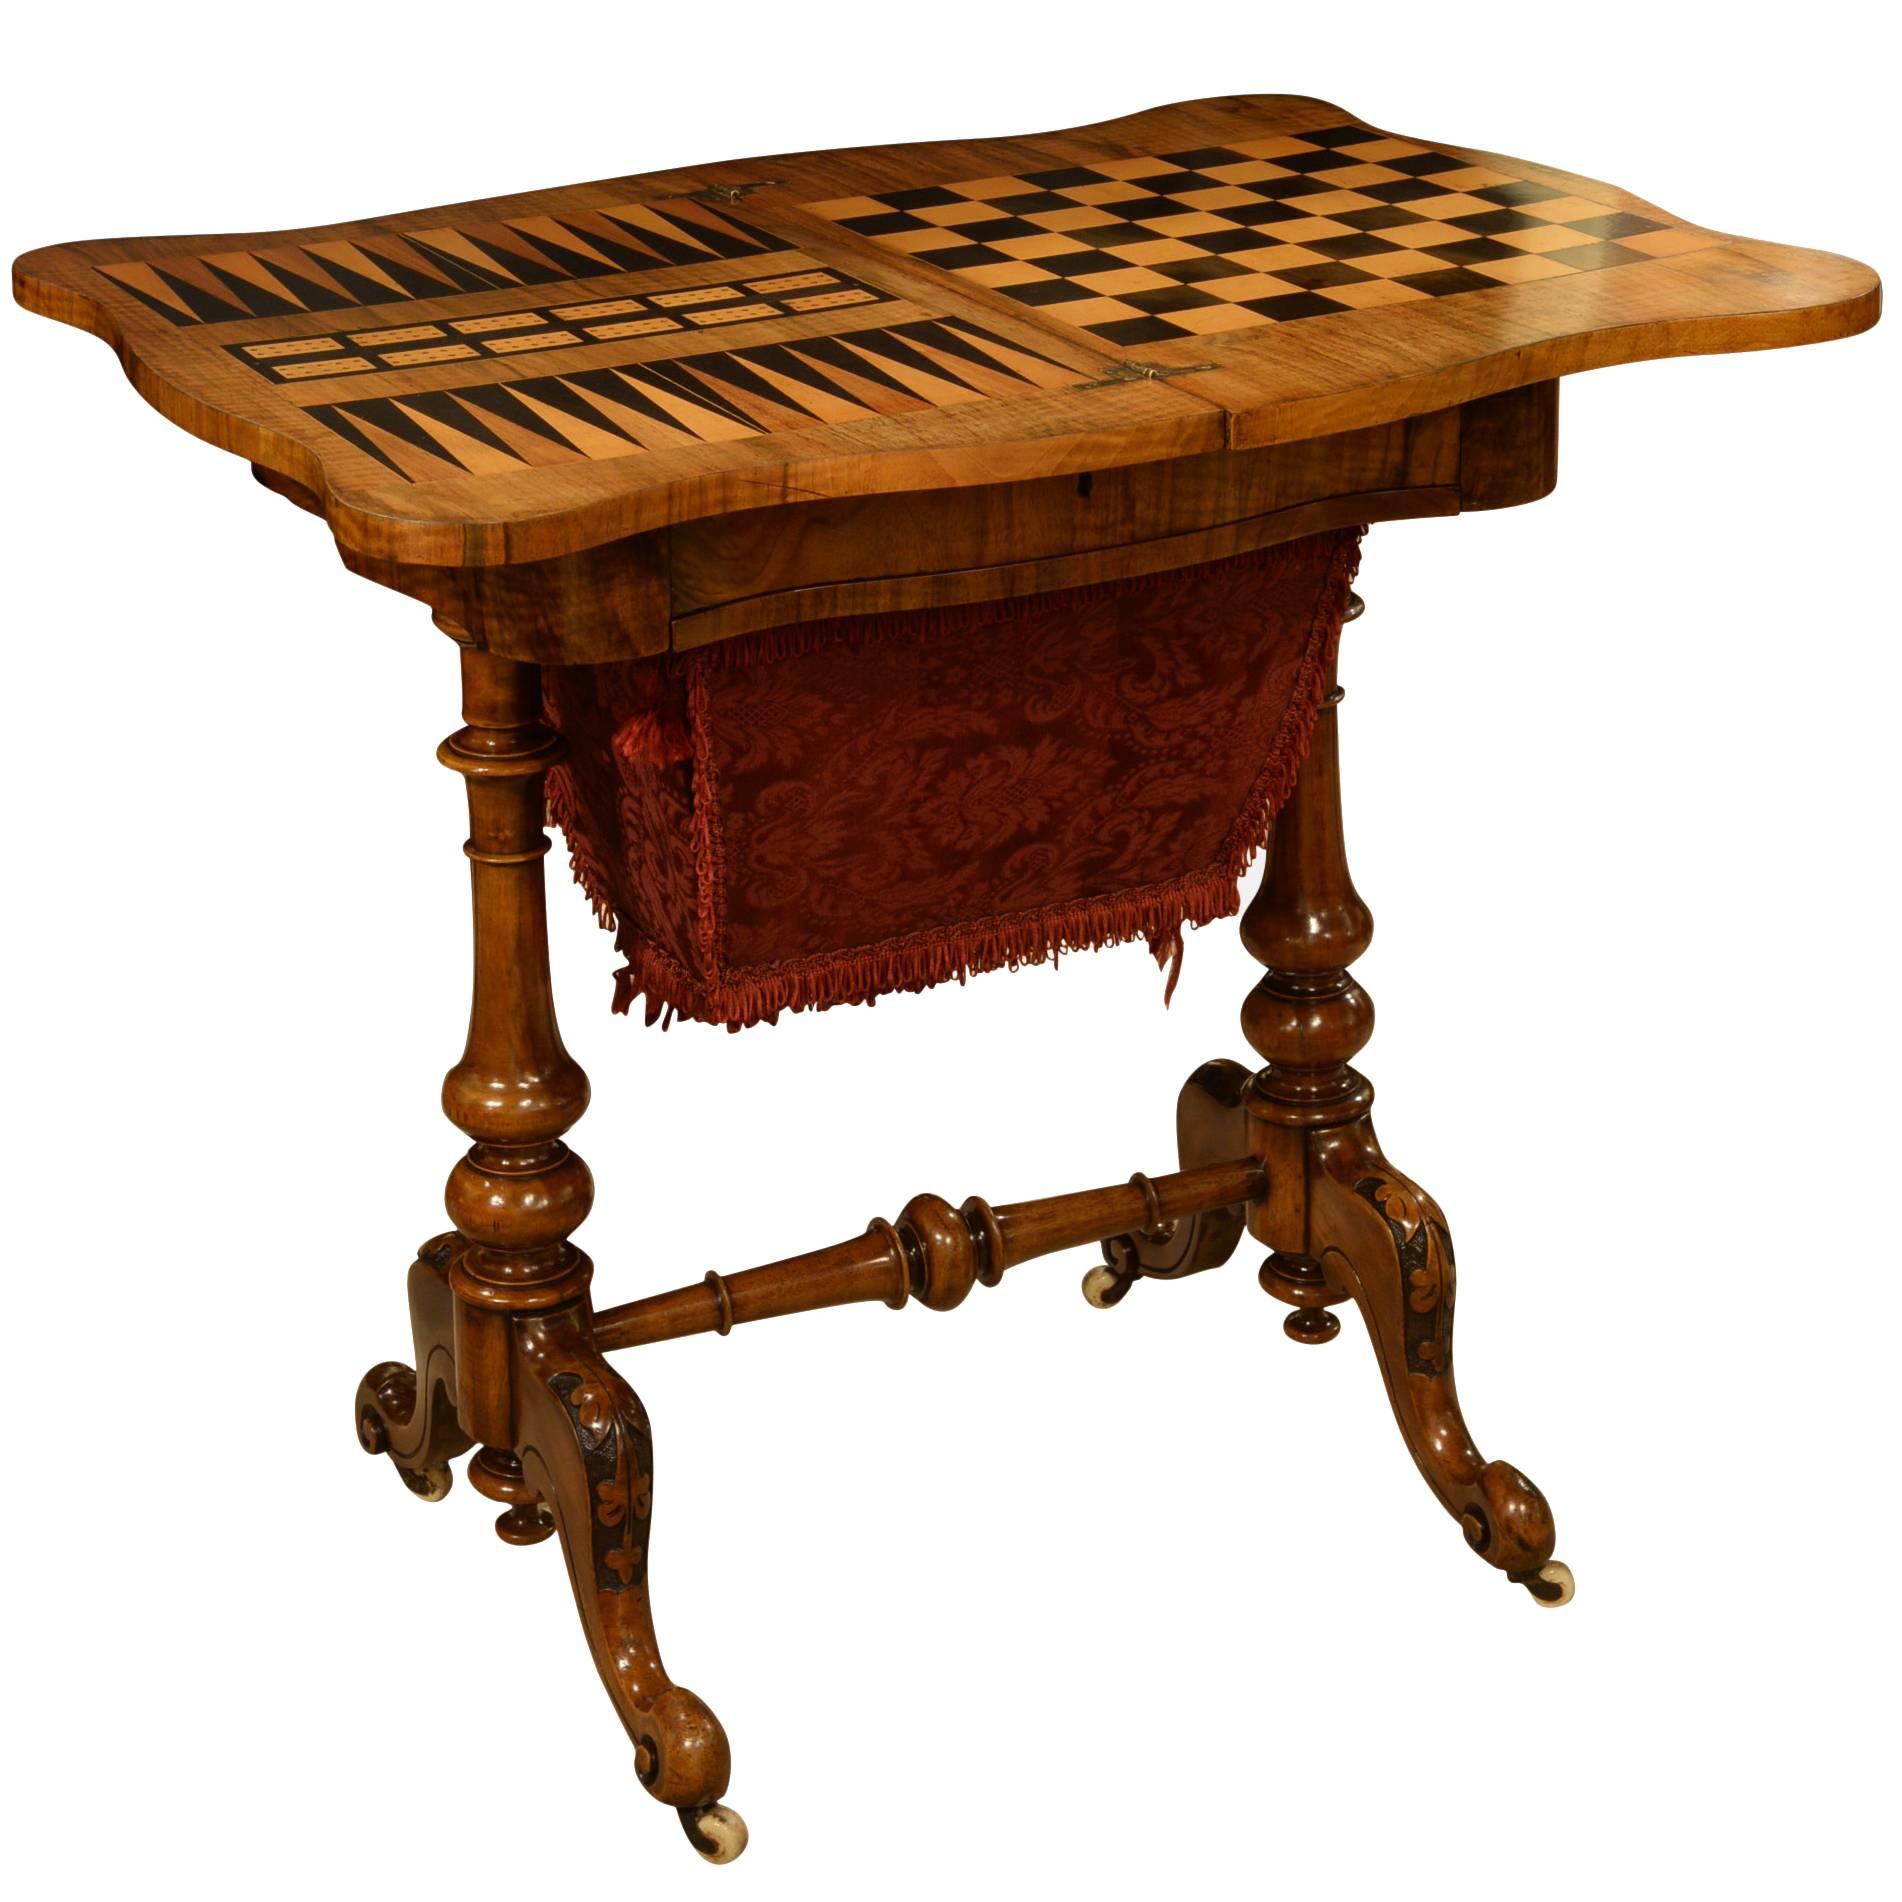 19th Century Games and Work Table